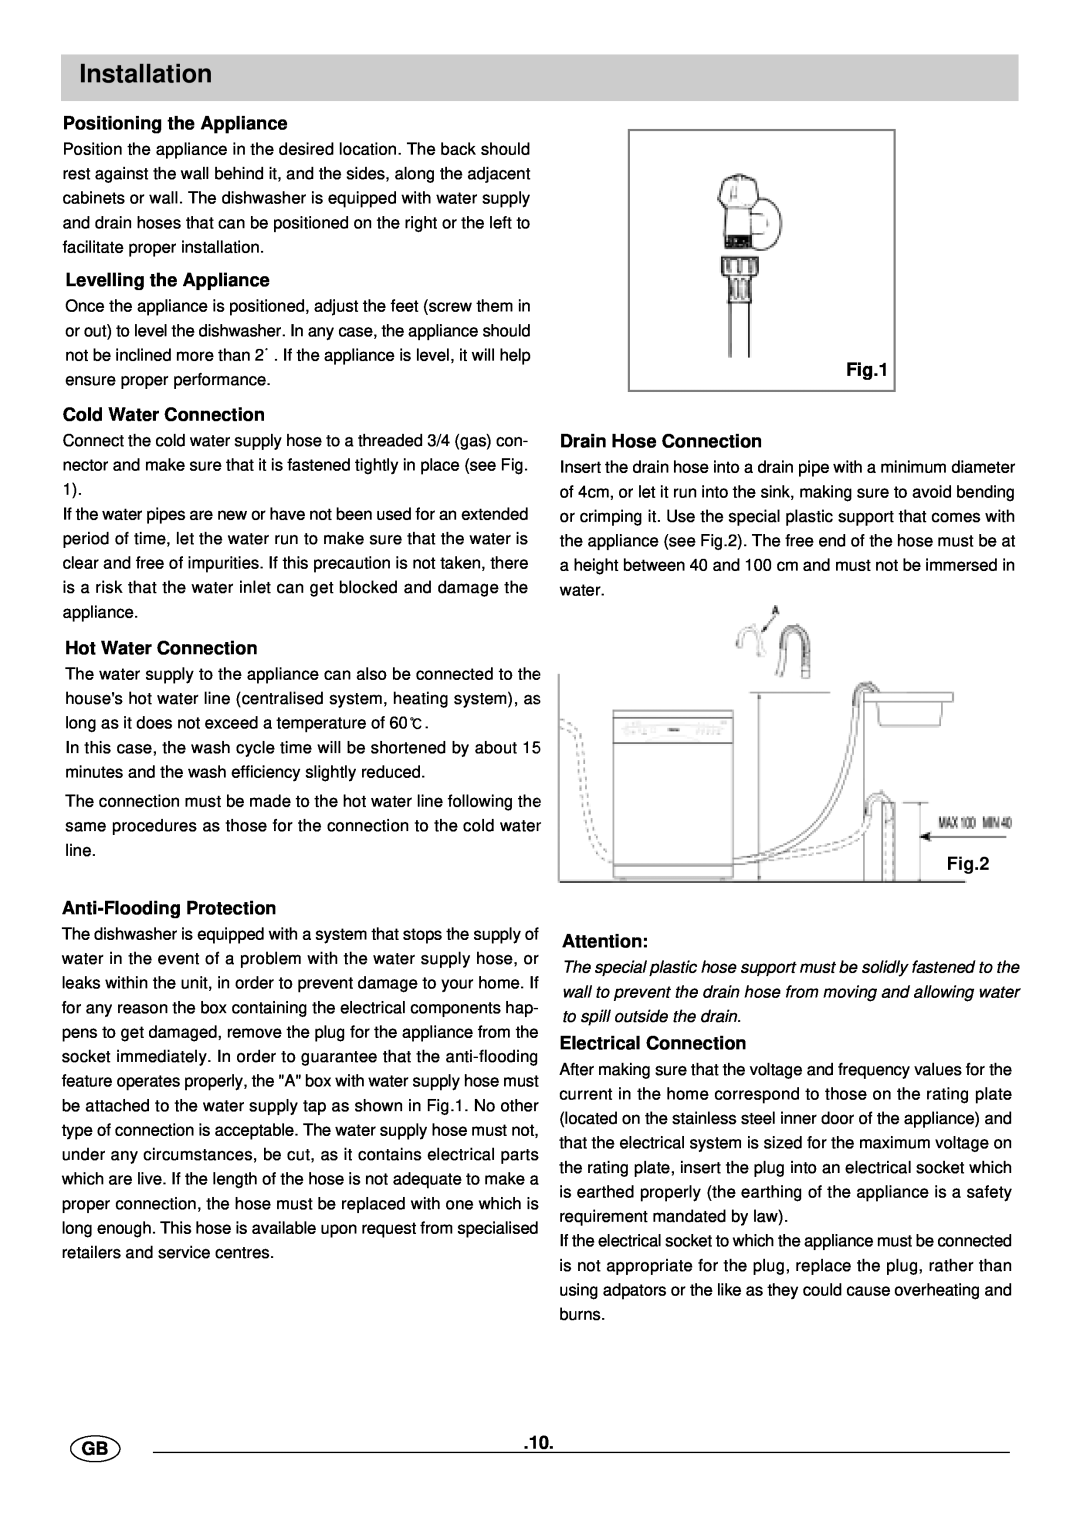 Haier WQP12-BFE manual Installation, Positioning the Appliance, Levelling the Appliance, Cold Water Connection 